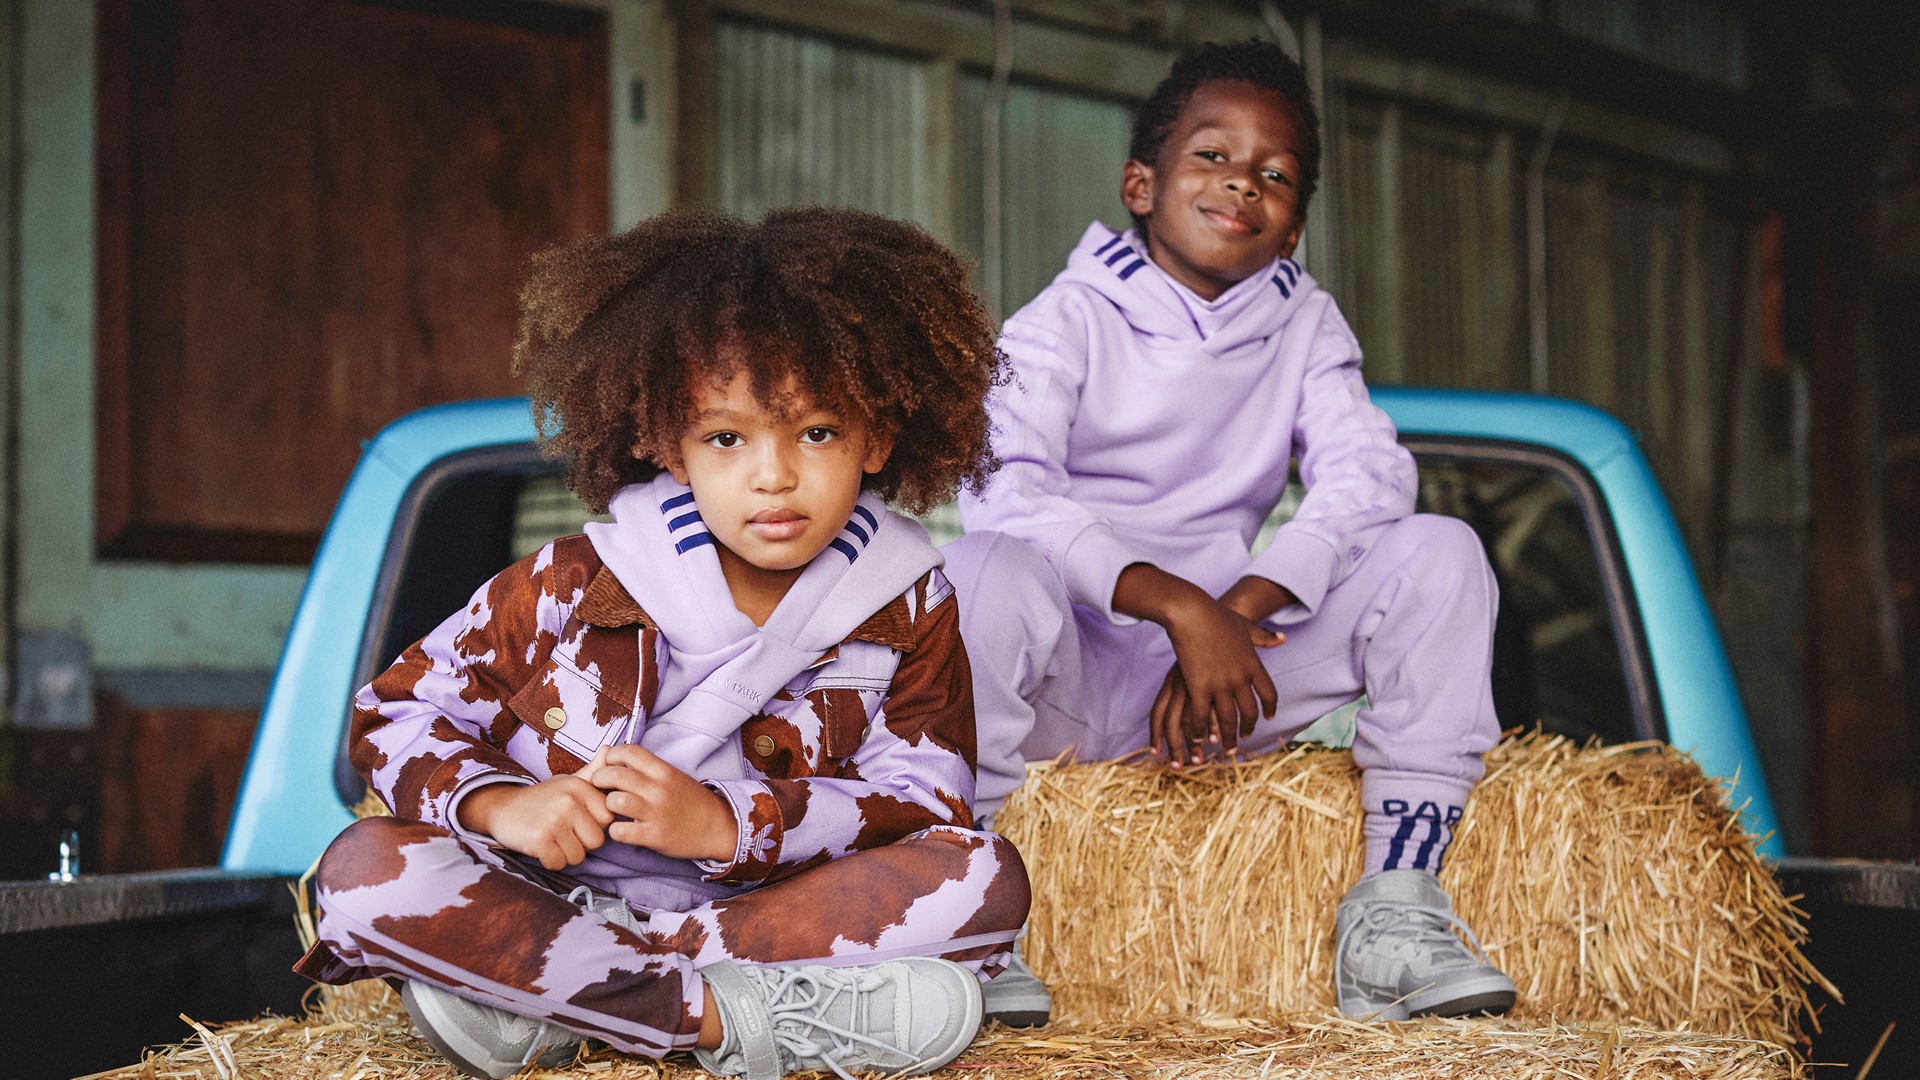 Introducing Kids' Apparel for the First as part of IVY PARK Rodeo